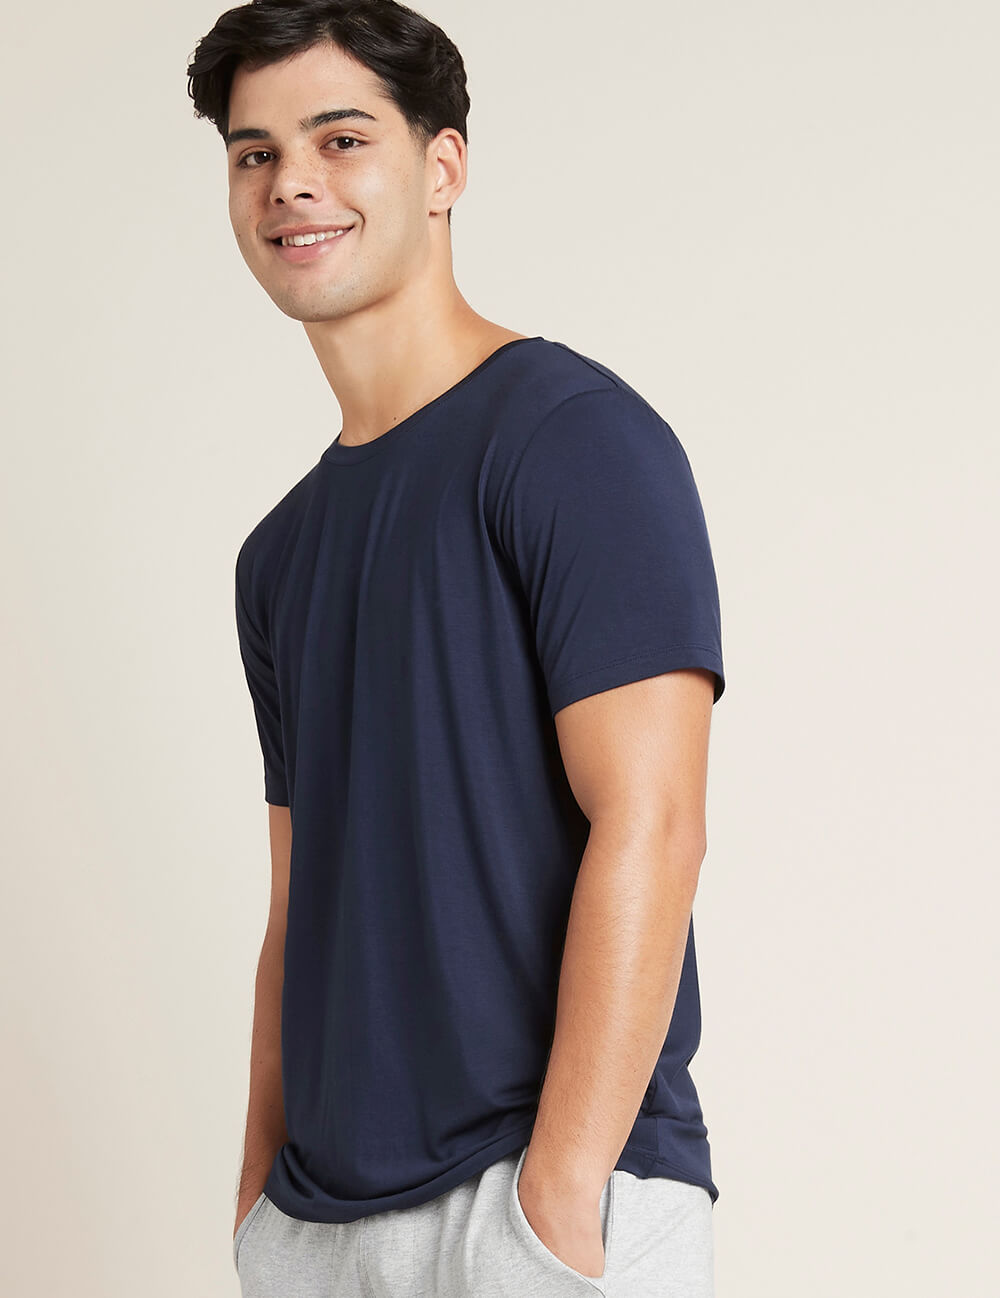 Boody Bamboo Mens Crew Neck Shirt in Navy Blue Side View